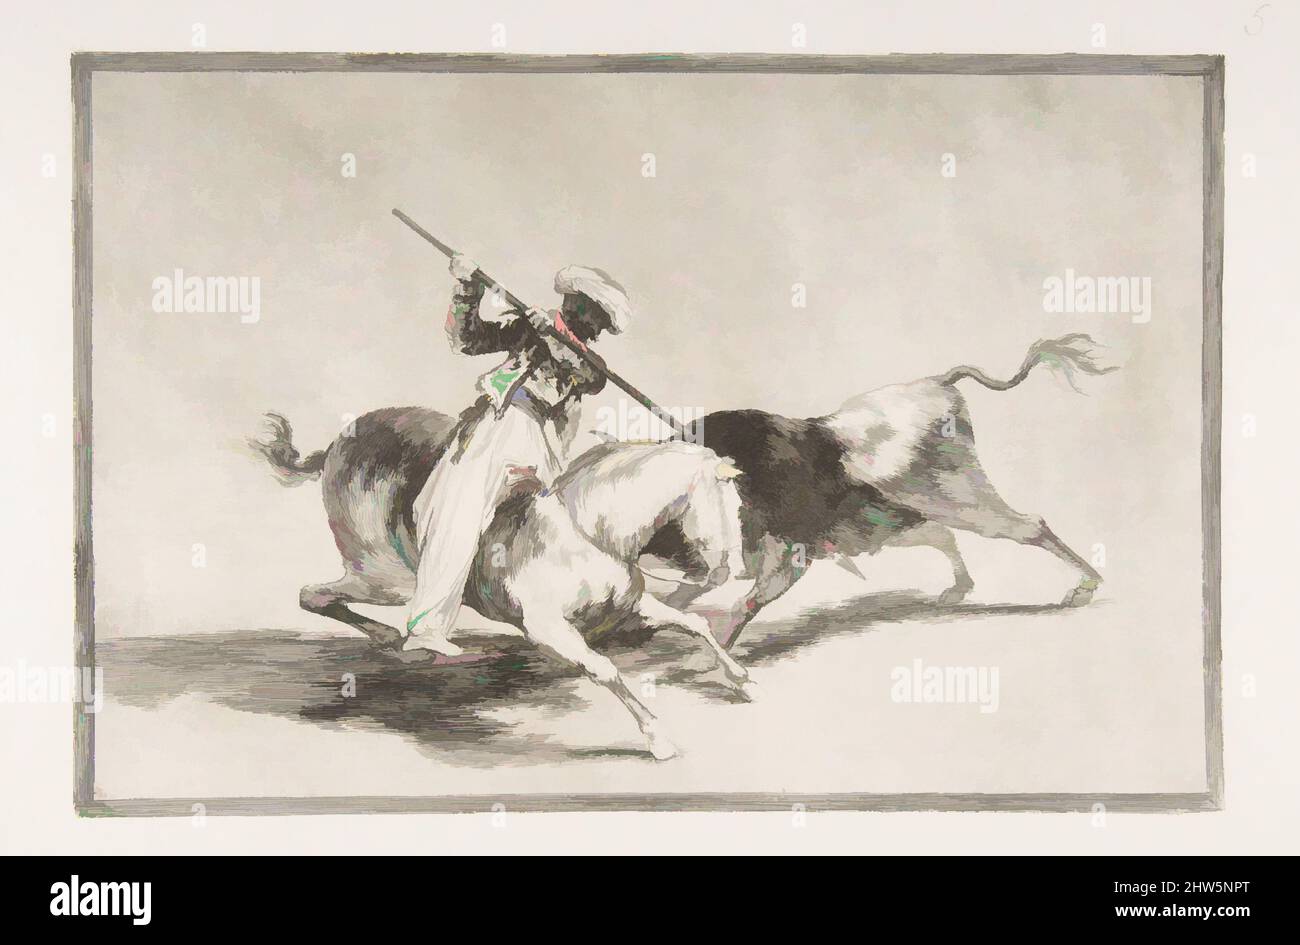 Art inspired by Plate 5 from 'The Tauromaquia': The spirited Moor Gazul is the first to spear bulls according to the rules, 1816, Etching, burnished aquatint and drypoint, Plate: 9 3/4 x 13 7/8 in. (24.7 x 35.2 cm), Prints, Goya (Francisco de Goya y Lucientes) (Spanish, Fuendetodos, Classic works modernized by Artotop with a splash of modernity. Shapes, color and value, eye-catching visual impact on art. Emotions through freedom of artworks in a contemporary way. A timeless message pursuing a wildly creative new direction. Artists turning to the digital medium and creating the Artotop NFT Stock Photo